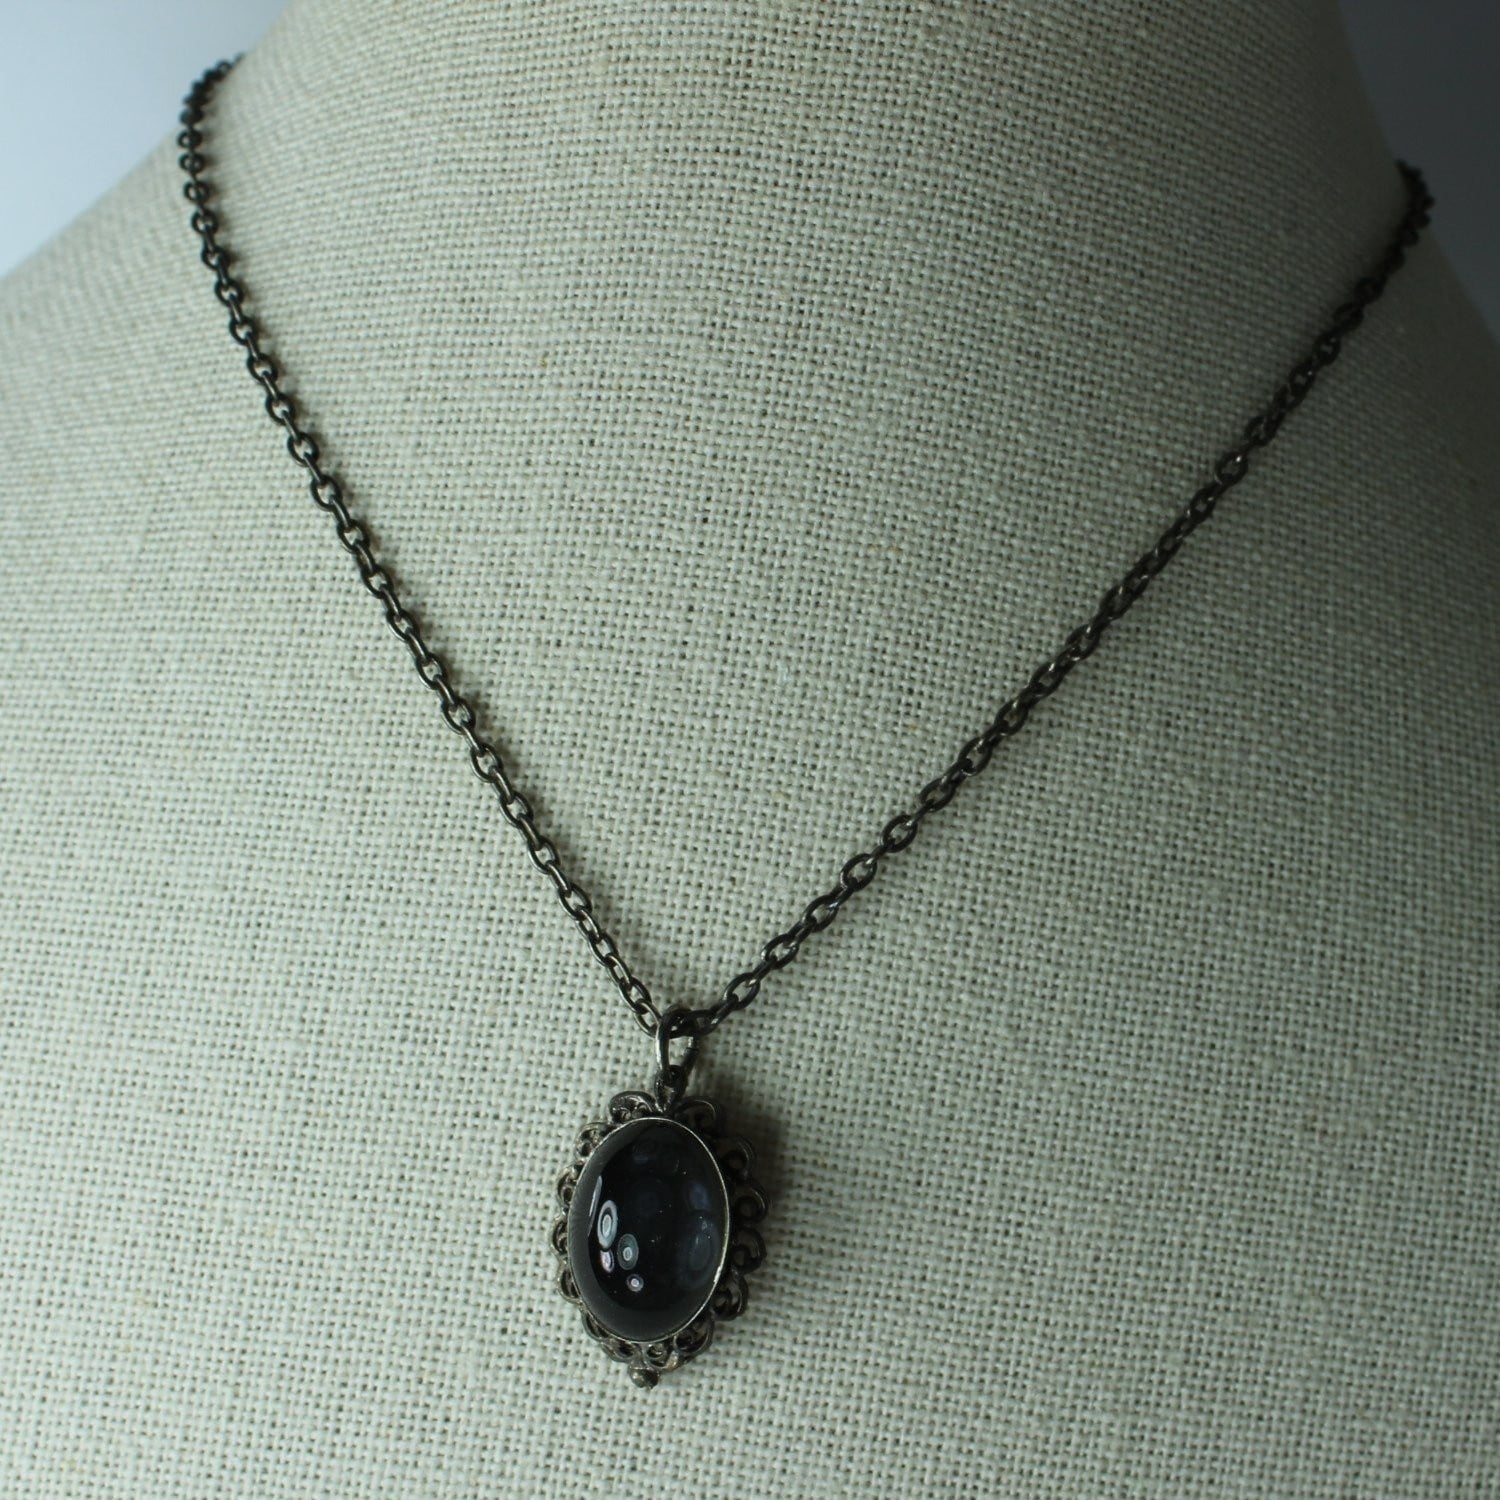 Vintage HOBE Necklace Smoky Glass Focal Silver Tone Chain mid century